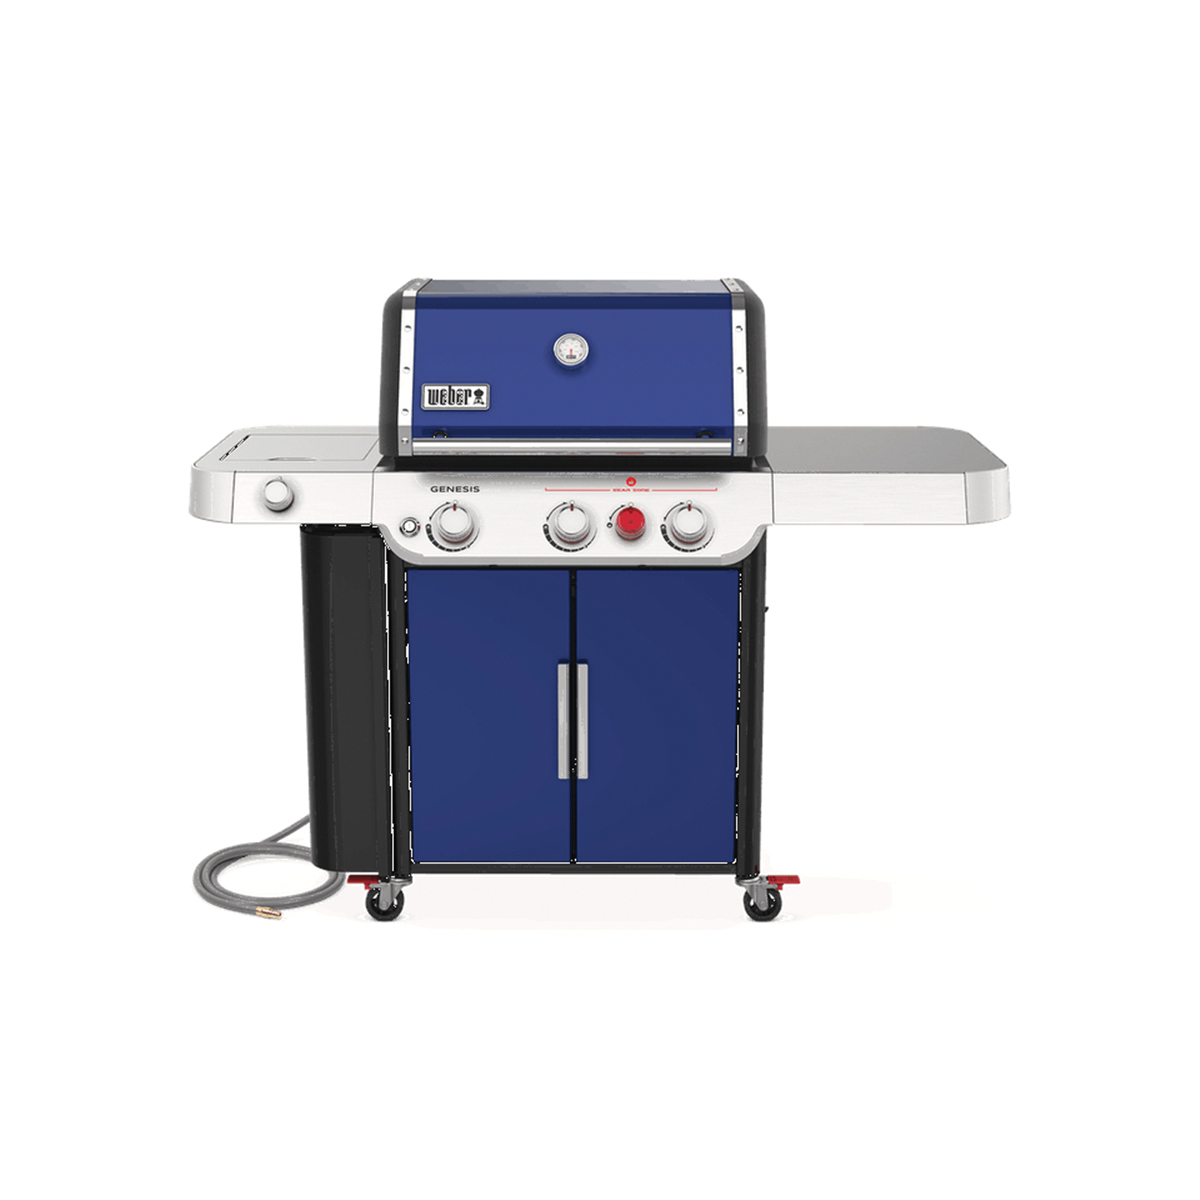 Weber GENESIS E-335 Series 37480001 Gas Grill, 39,000 Btu, Natural Gas, 3-Burner, 513 sq-in Primary Cooking Surface, 1/EA